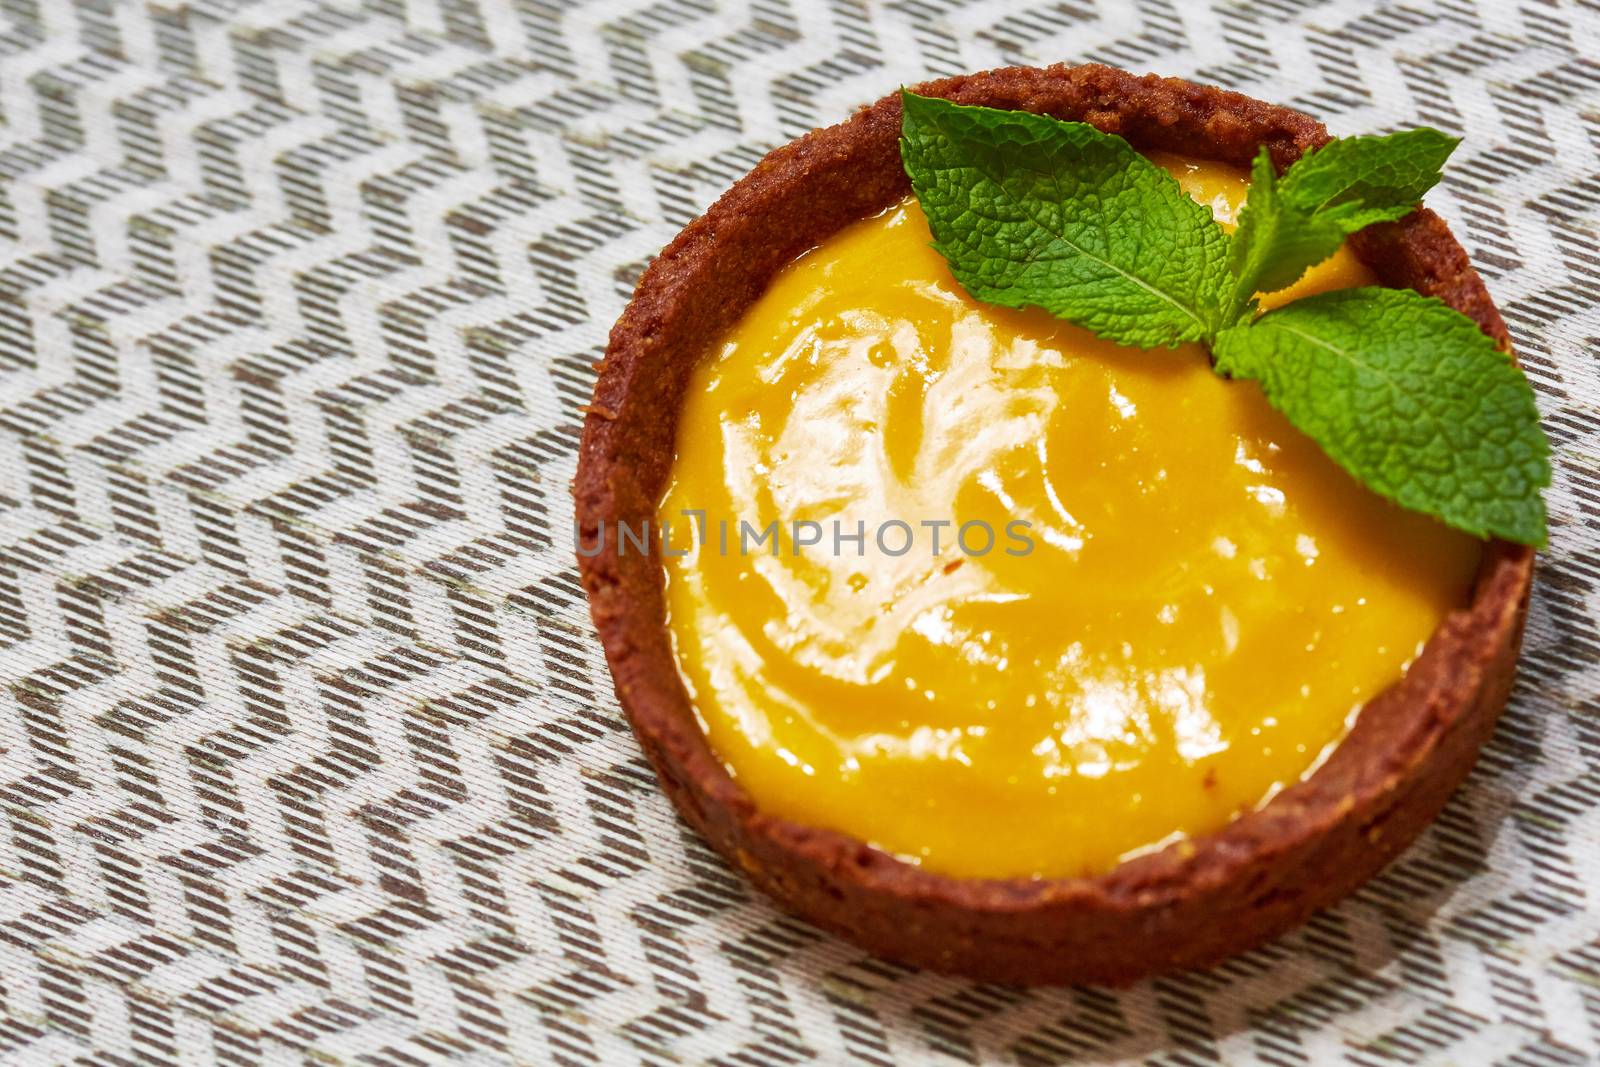 Sweet tartlets filled with cream. With copy space